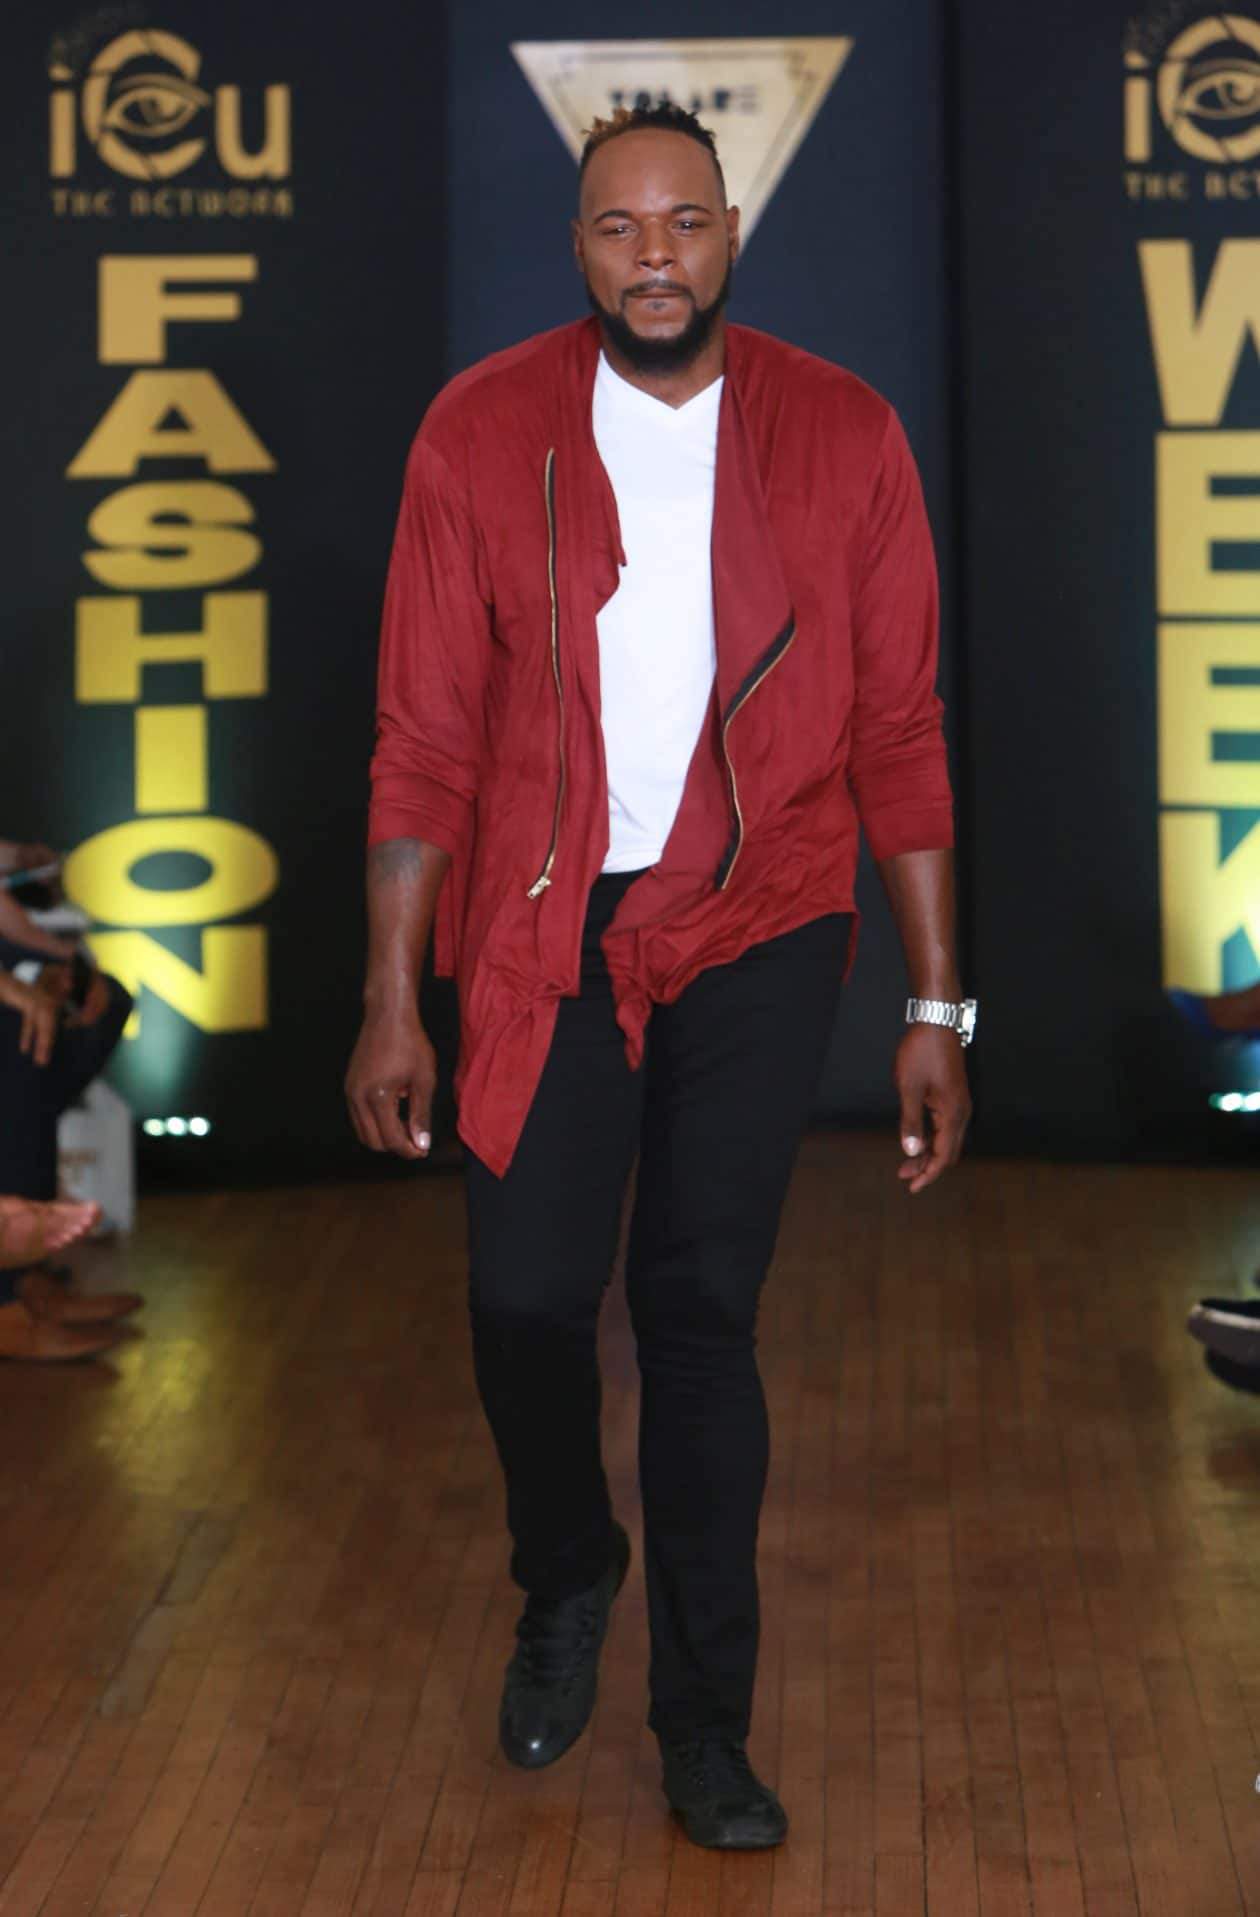 Big & Tall Menswear Collection- Volare at NYFW 